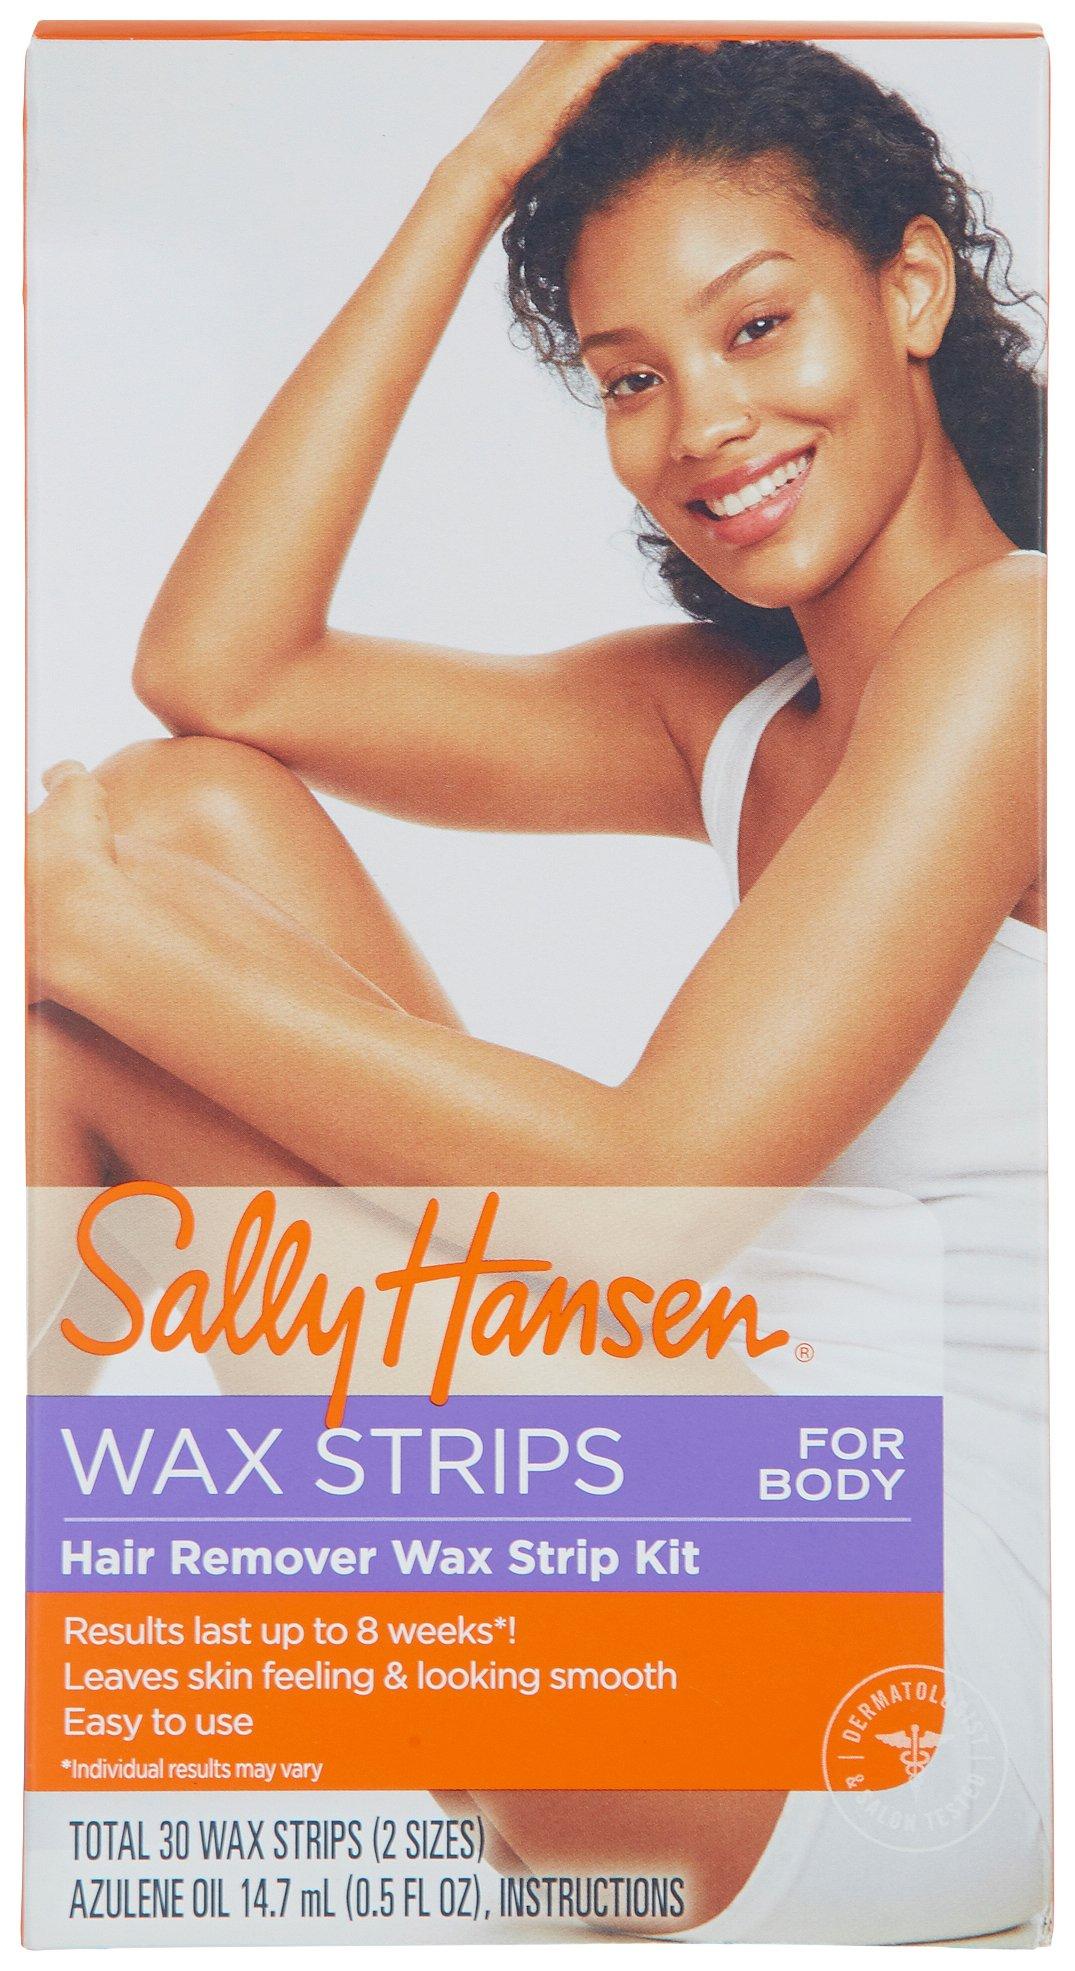 Wax Strips Hair Removal Kit For Body